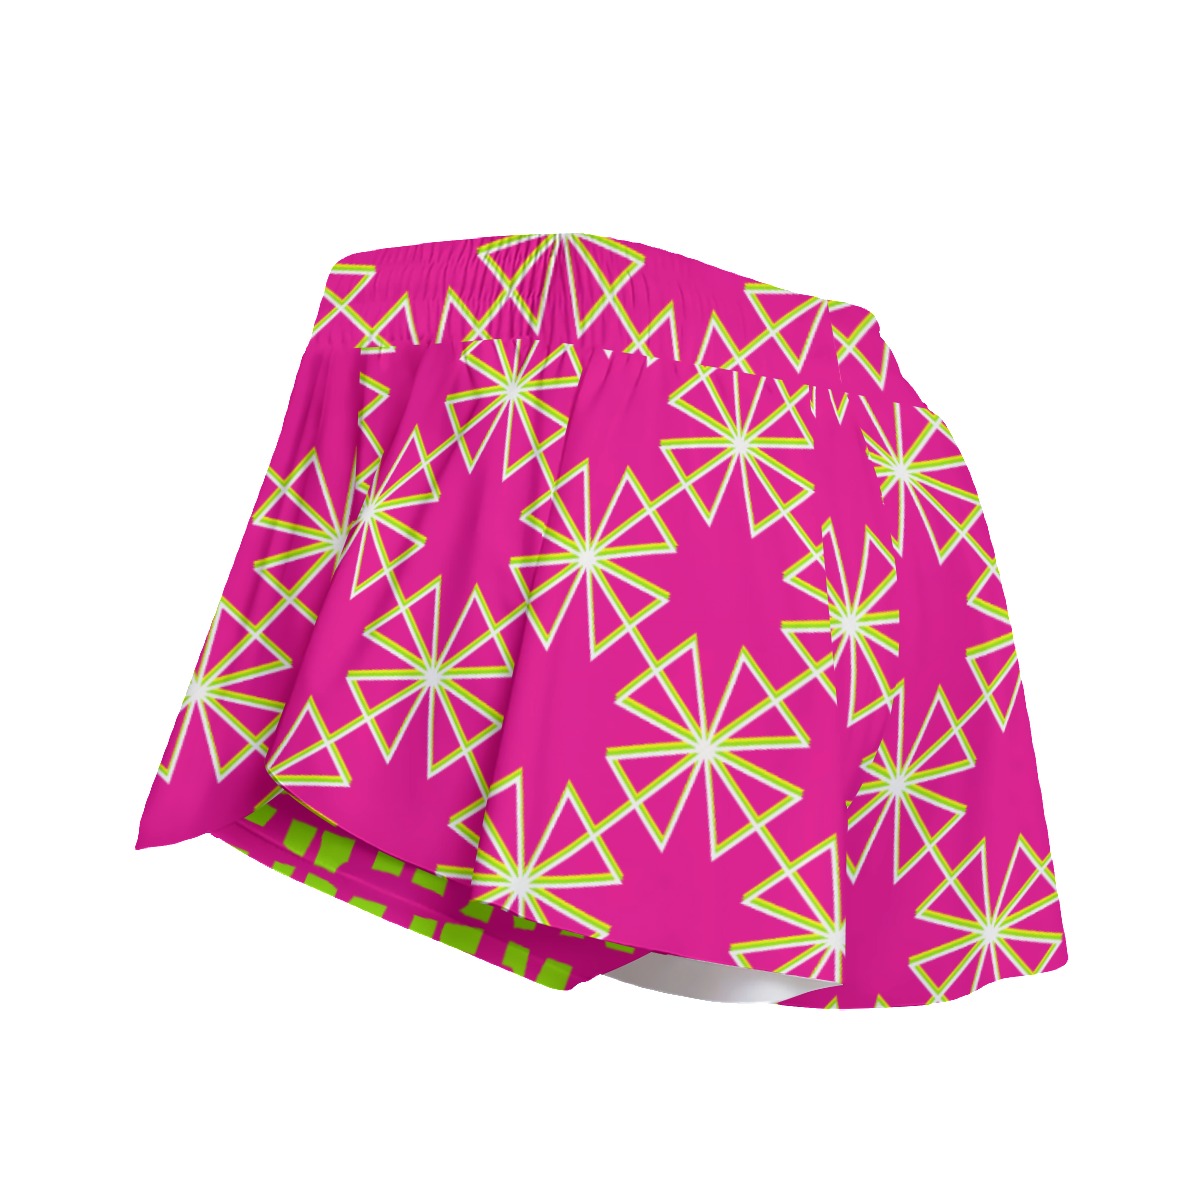 Dizzy Pickle Dinking Diva Stars Pickleball Women's Sport Culottes Skorts with Inner Shorts and Pockets Pink